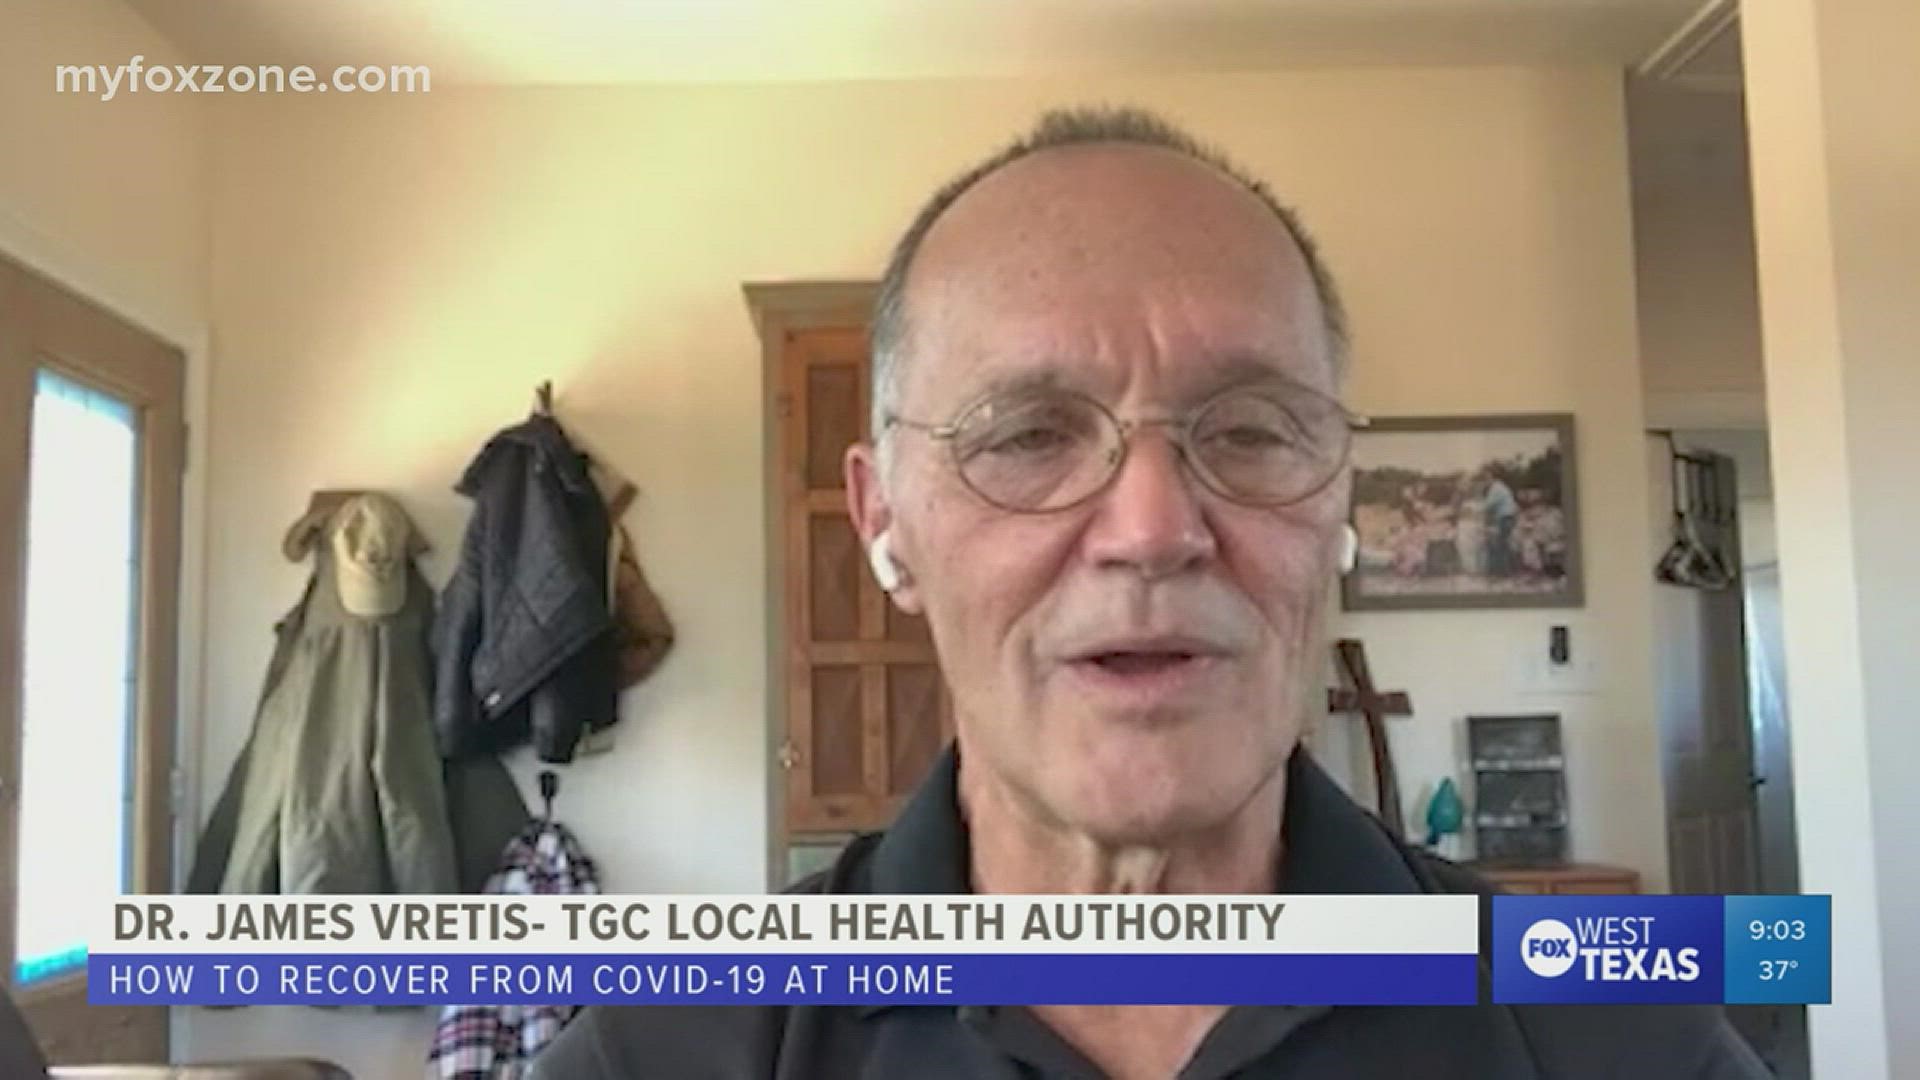 Local health professionals share ways to recover from COVID-19 from home.